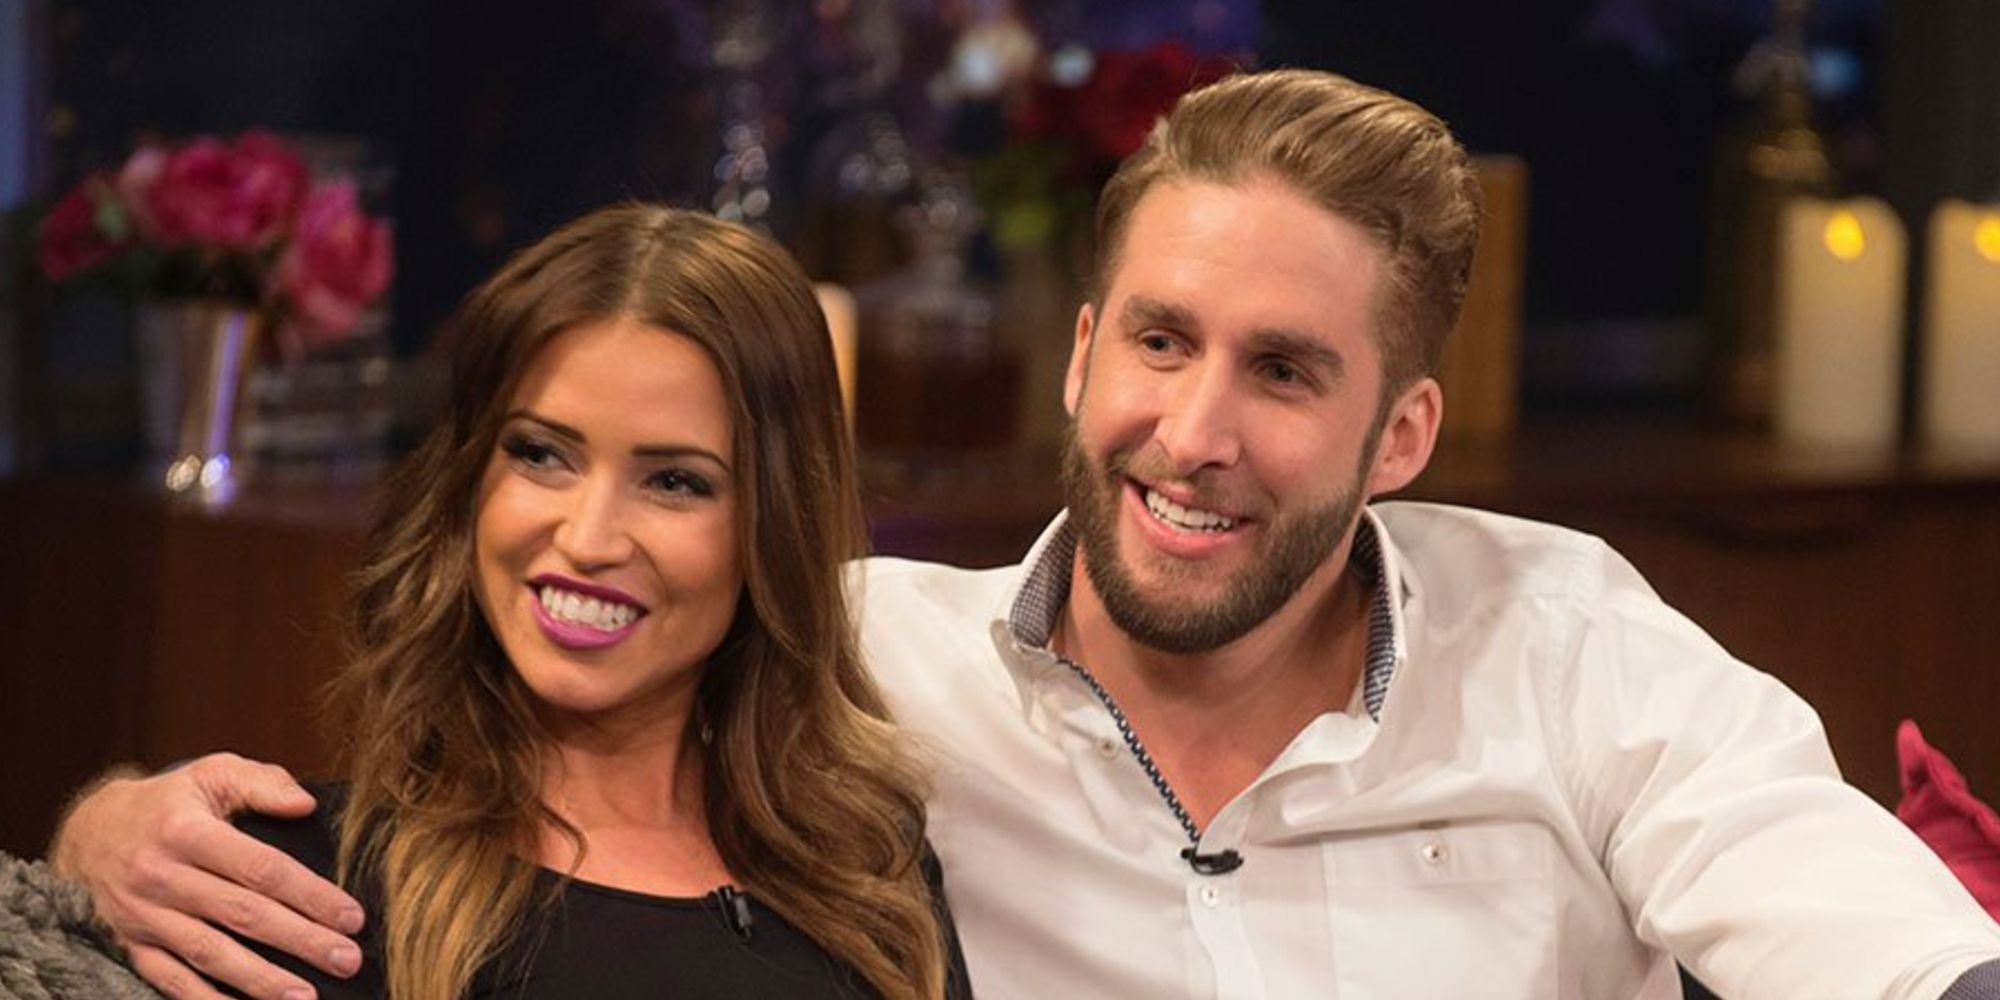 Kaitlyn Bristowe and Shawn Booth on The Bachelorette season 11 smiling